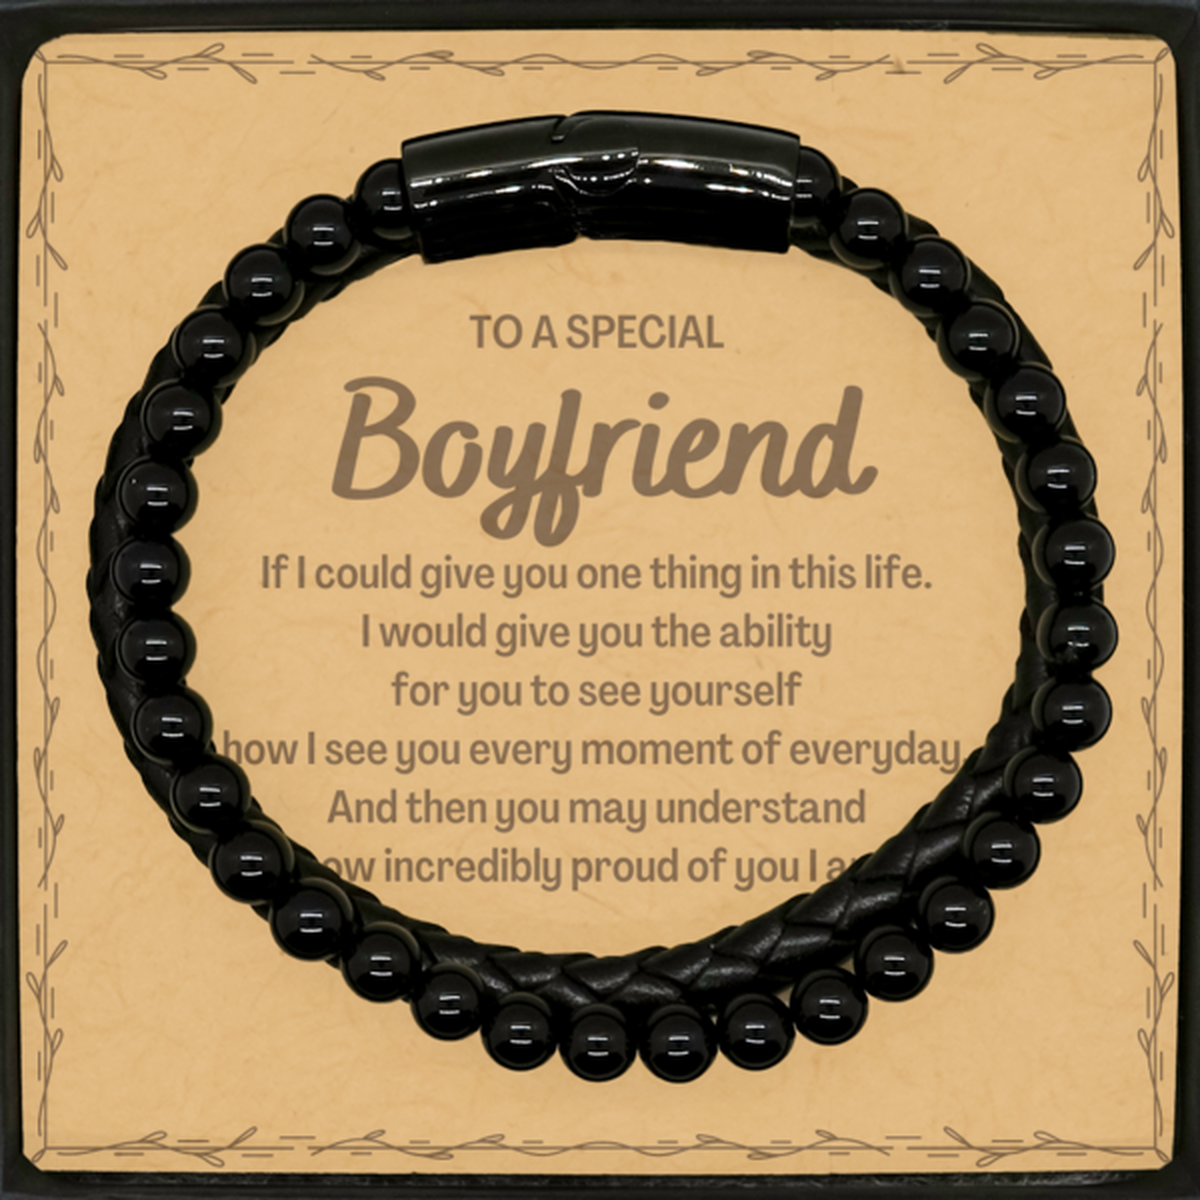 To My Boyfriend Stone Leather Bracelets, Gifts For Boyfriend Message Card, Inspirational Gifts for Christmas Birthday, Epic Gifts for Boyfriend To A Special Boyfriend how incredibly proud of you I am